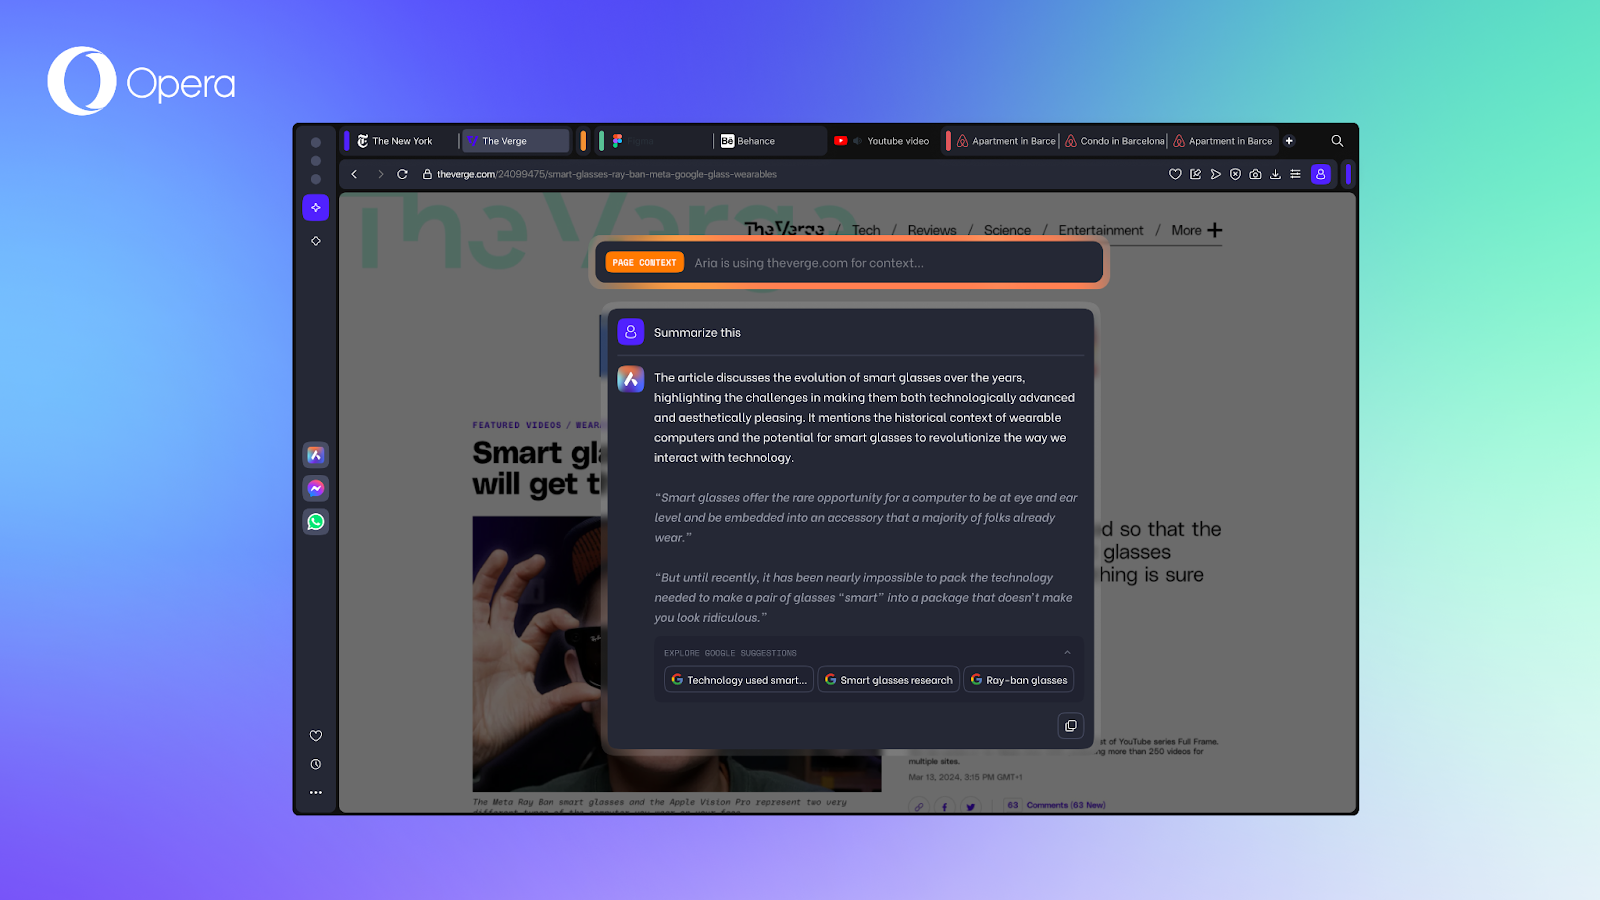 Aria's command Line update includes Page context Mode. Here is an example of Page Context Mode in which Aria summarizes the content of the article you are currently on. In this case, an article about smart glasses.